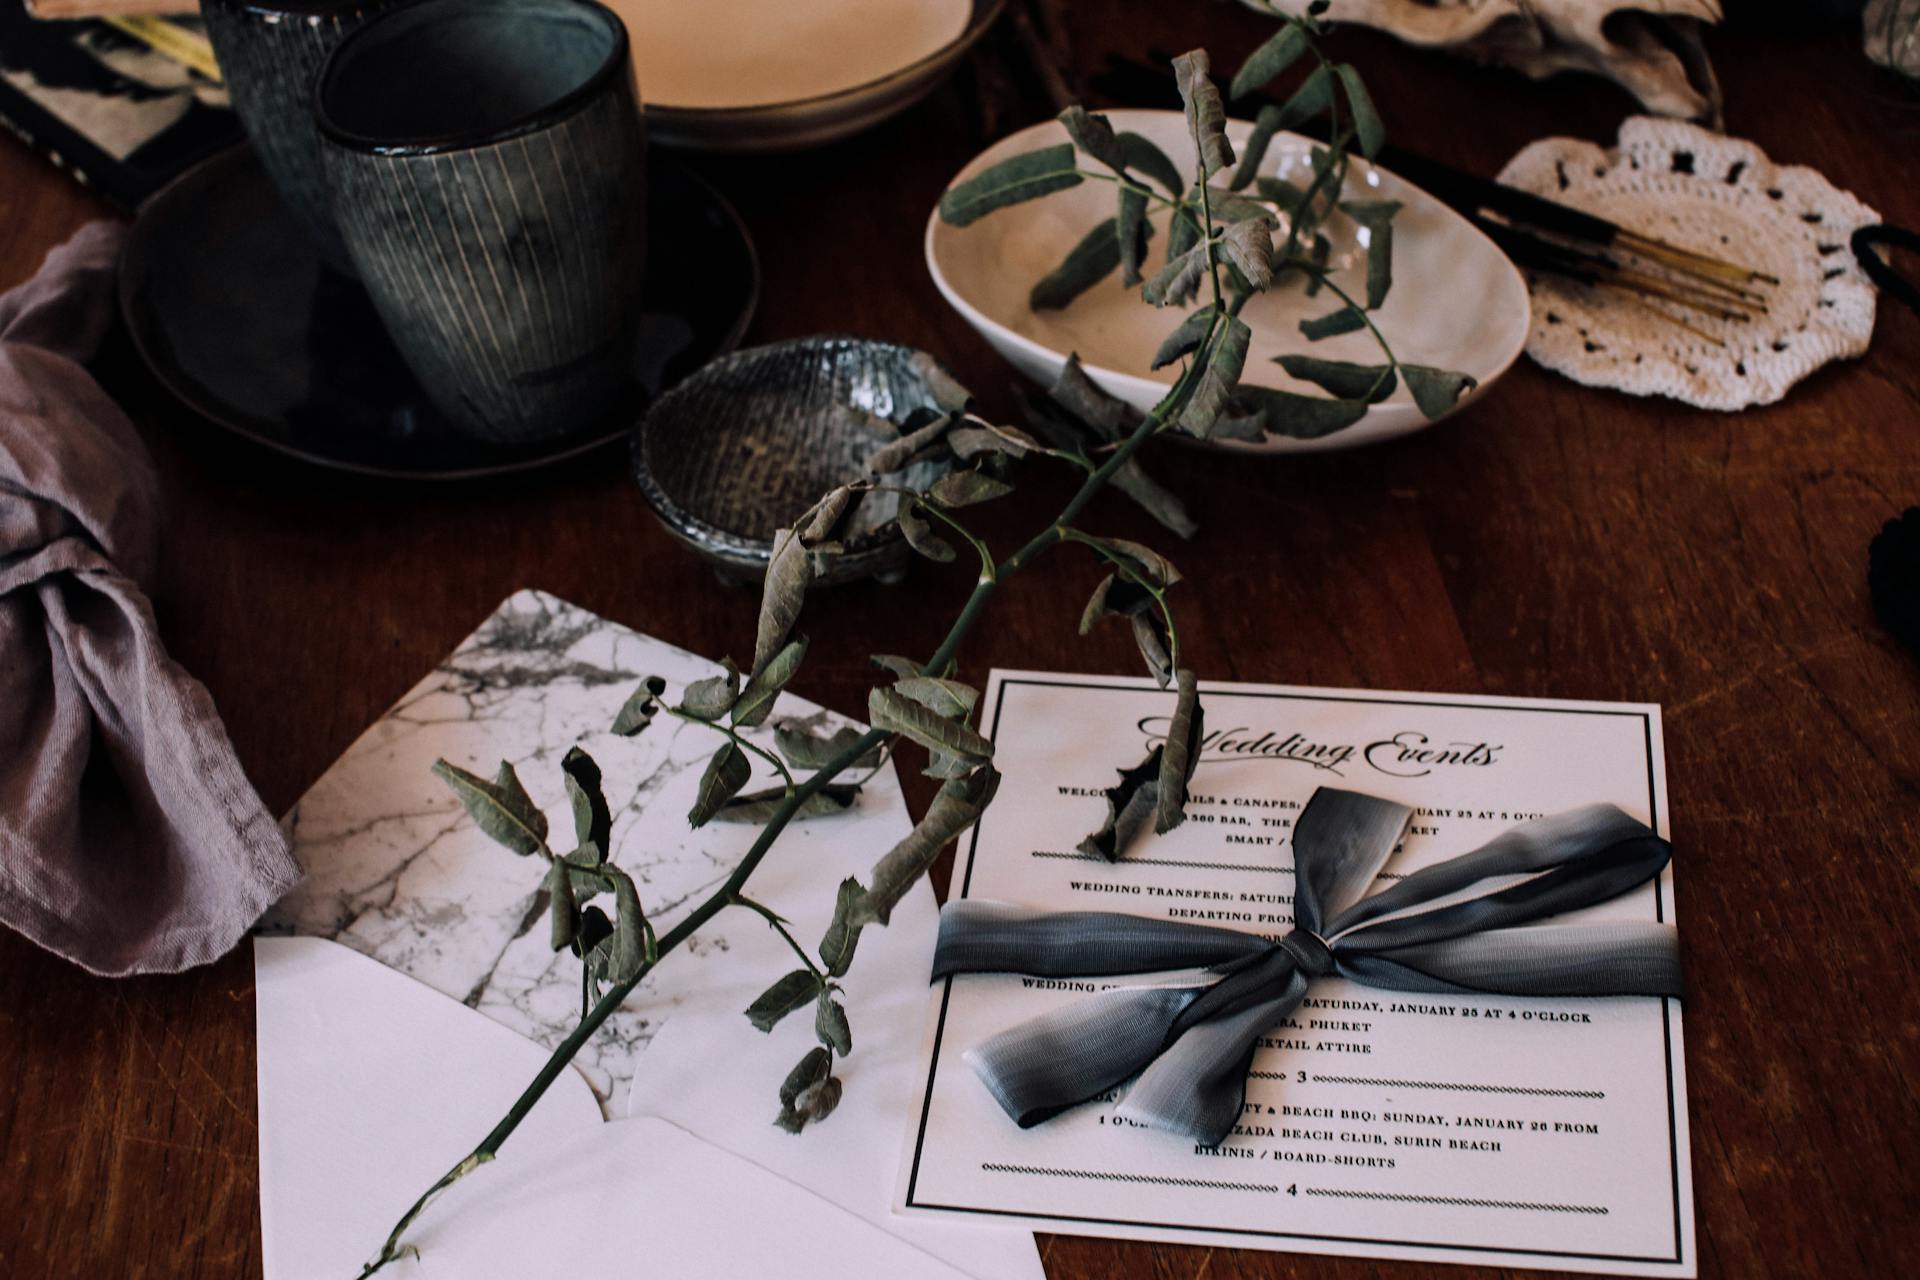 A wedding invitation on a table with utensils and decorations | Source: Pexels